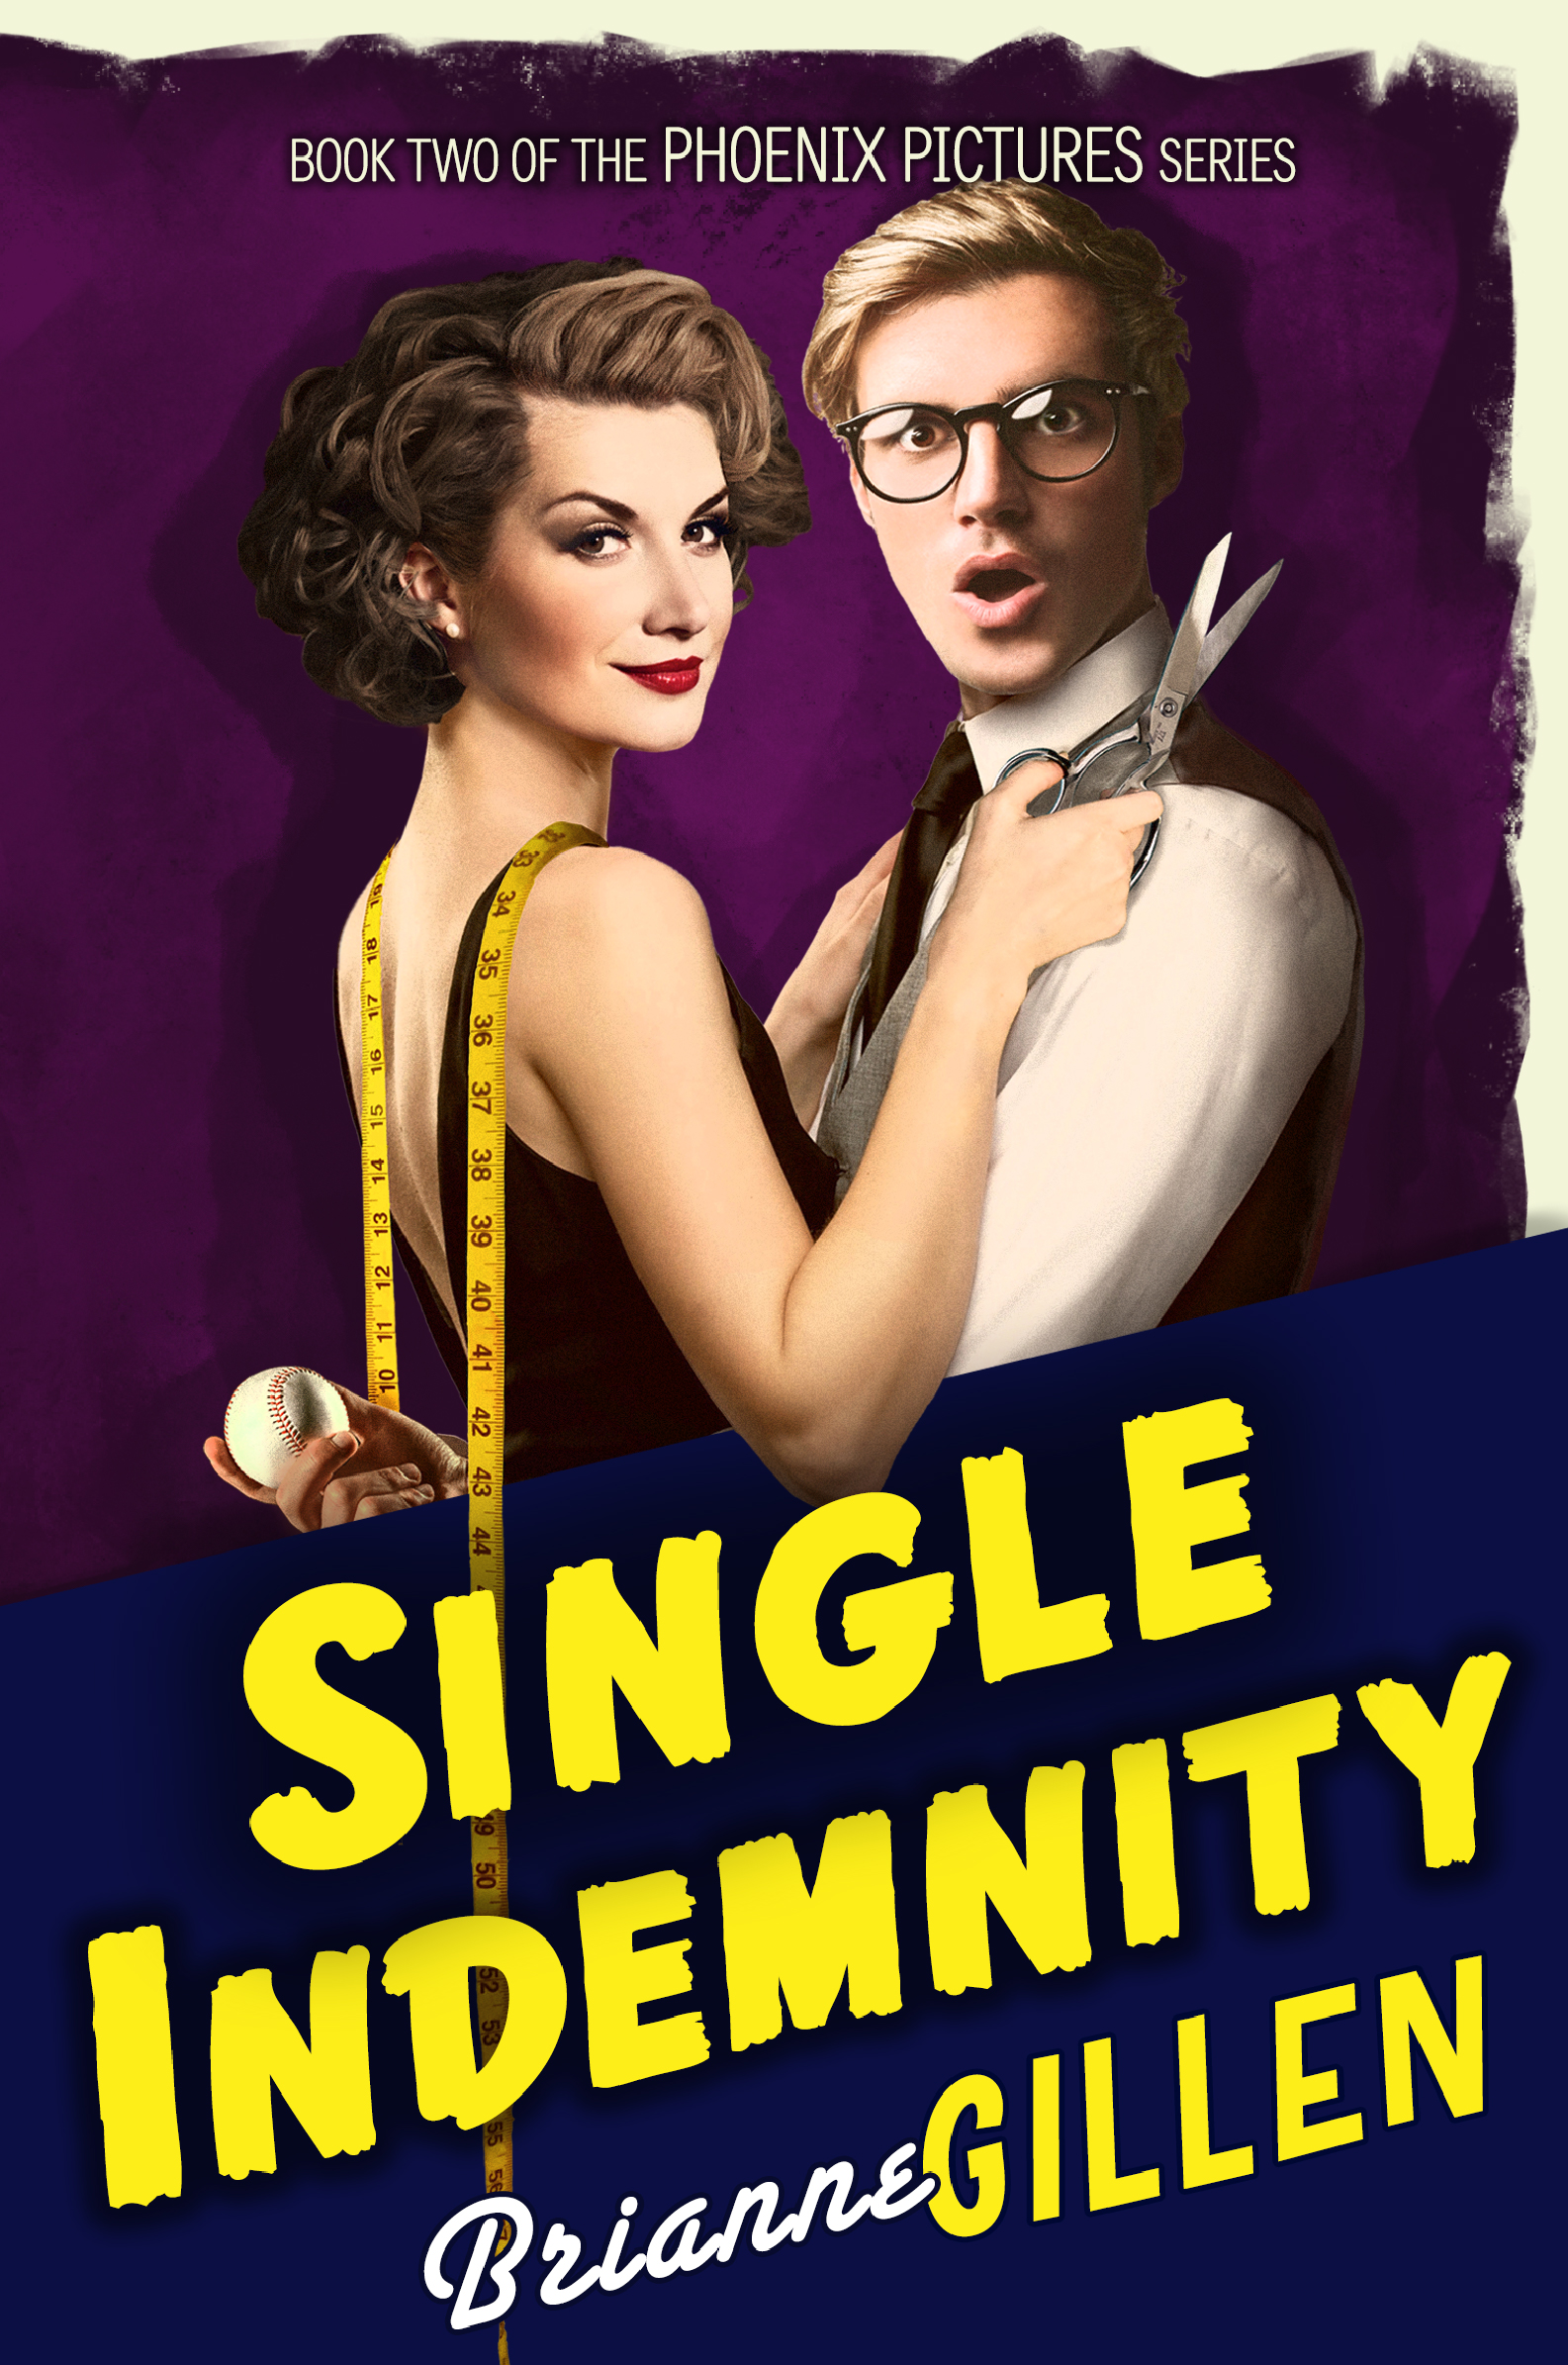 Cover of Single Indemnity, featuring (against a purple background) a brunette white woman with red lipstick, wearing a black dress and a yellow tape measure draped around her neck and holding a pair of silver scissors, embraces a blonde white man, mouth open in shock, wearing glasses and a white shirt, tan vest, and dark tie, and holding a baseball behind her back. A blue band with yellow lettering across the bottom reads "Single Indemnity. Brianne Gillen."